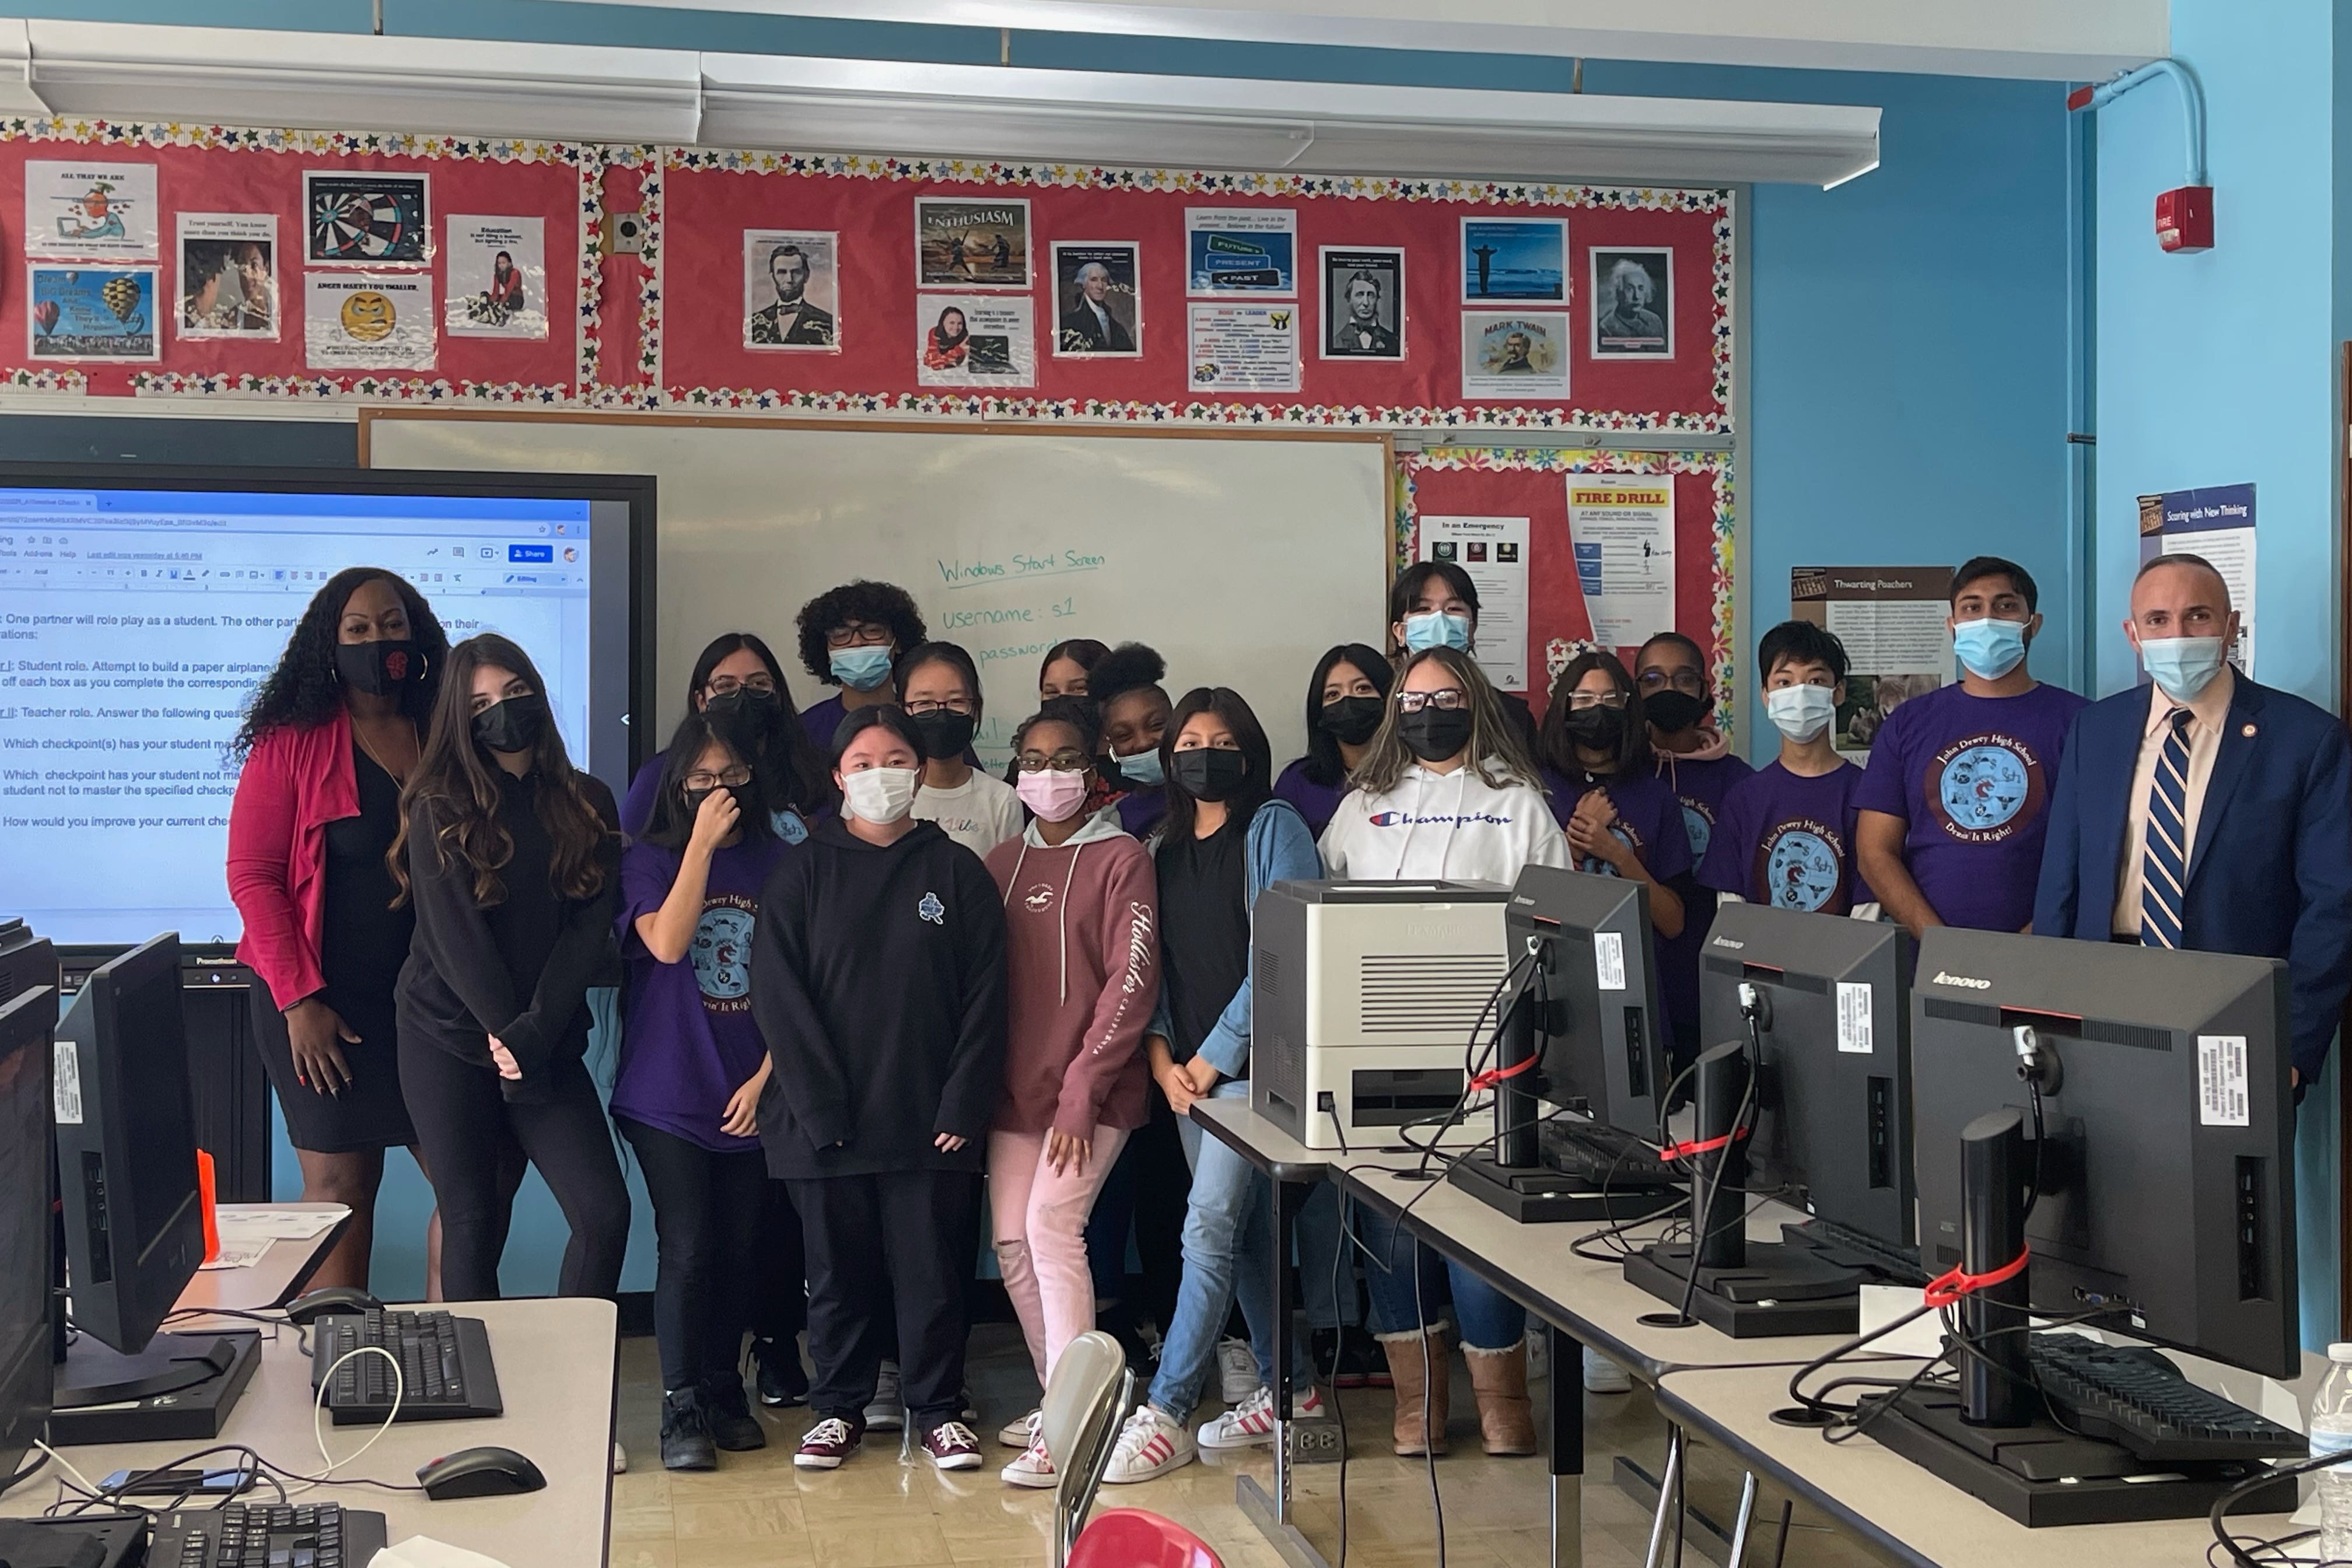 A group of students wearing masks stand inside a classroom.